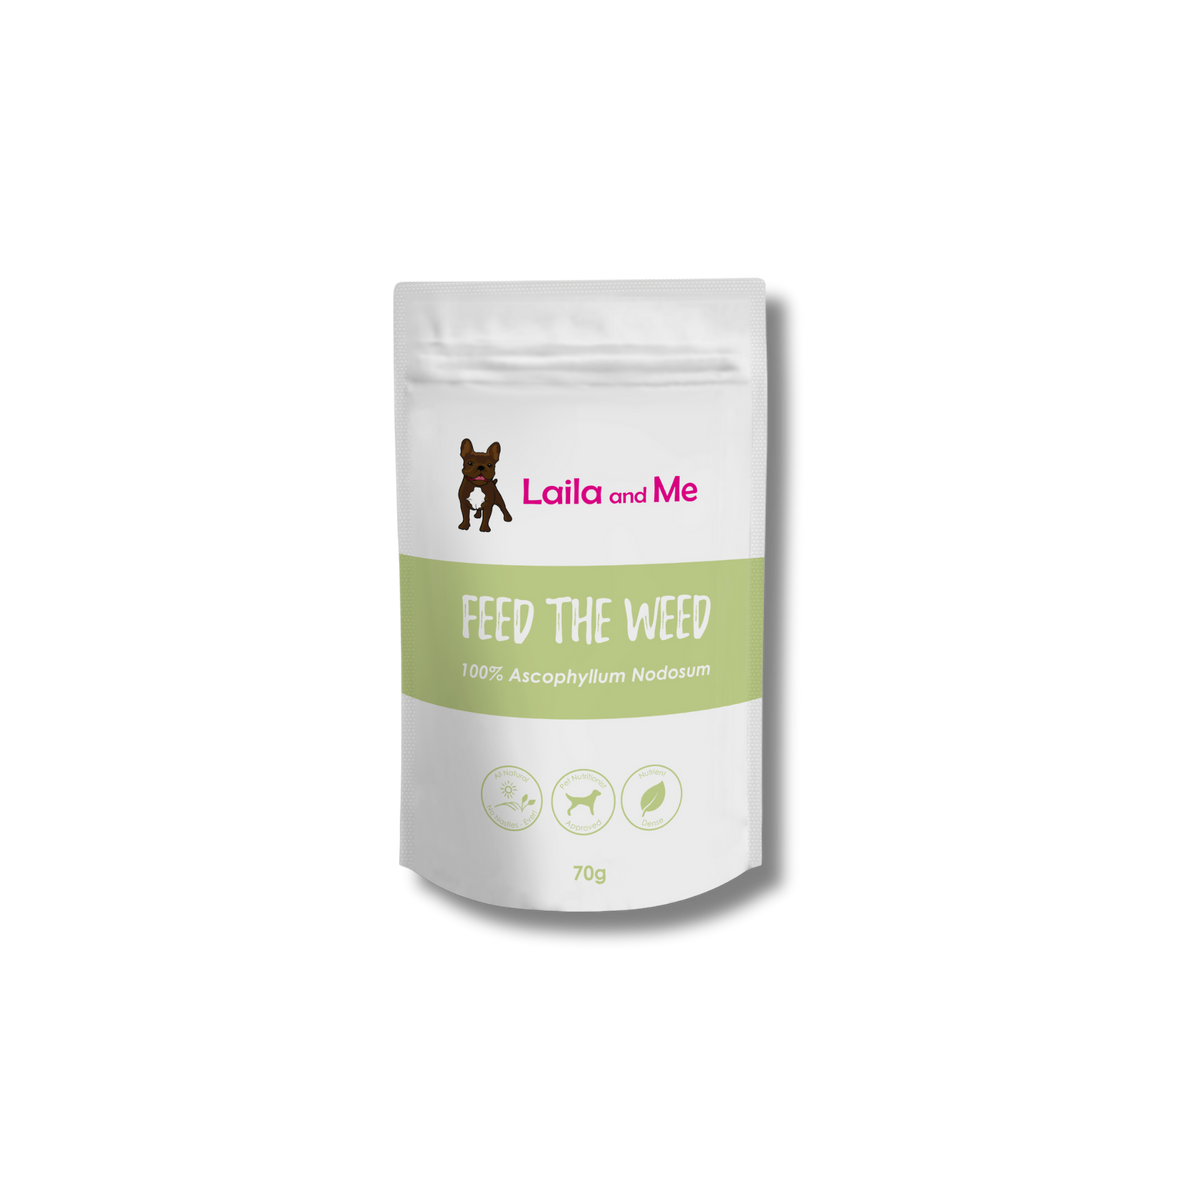 Feed the Weed Powder for Pets - Laila and Me